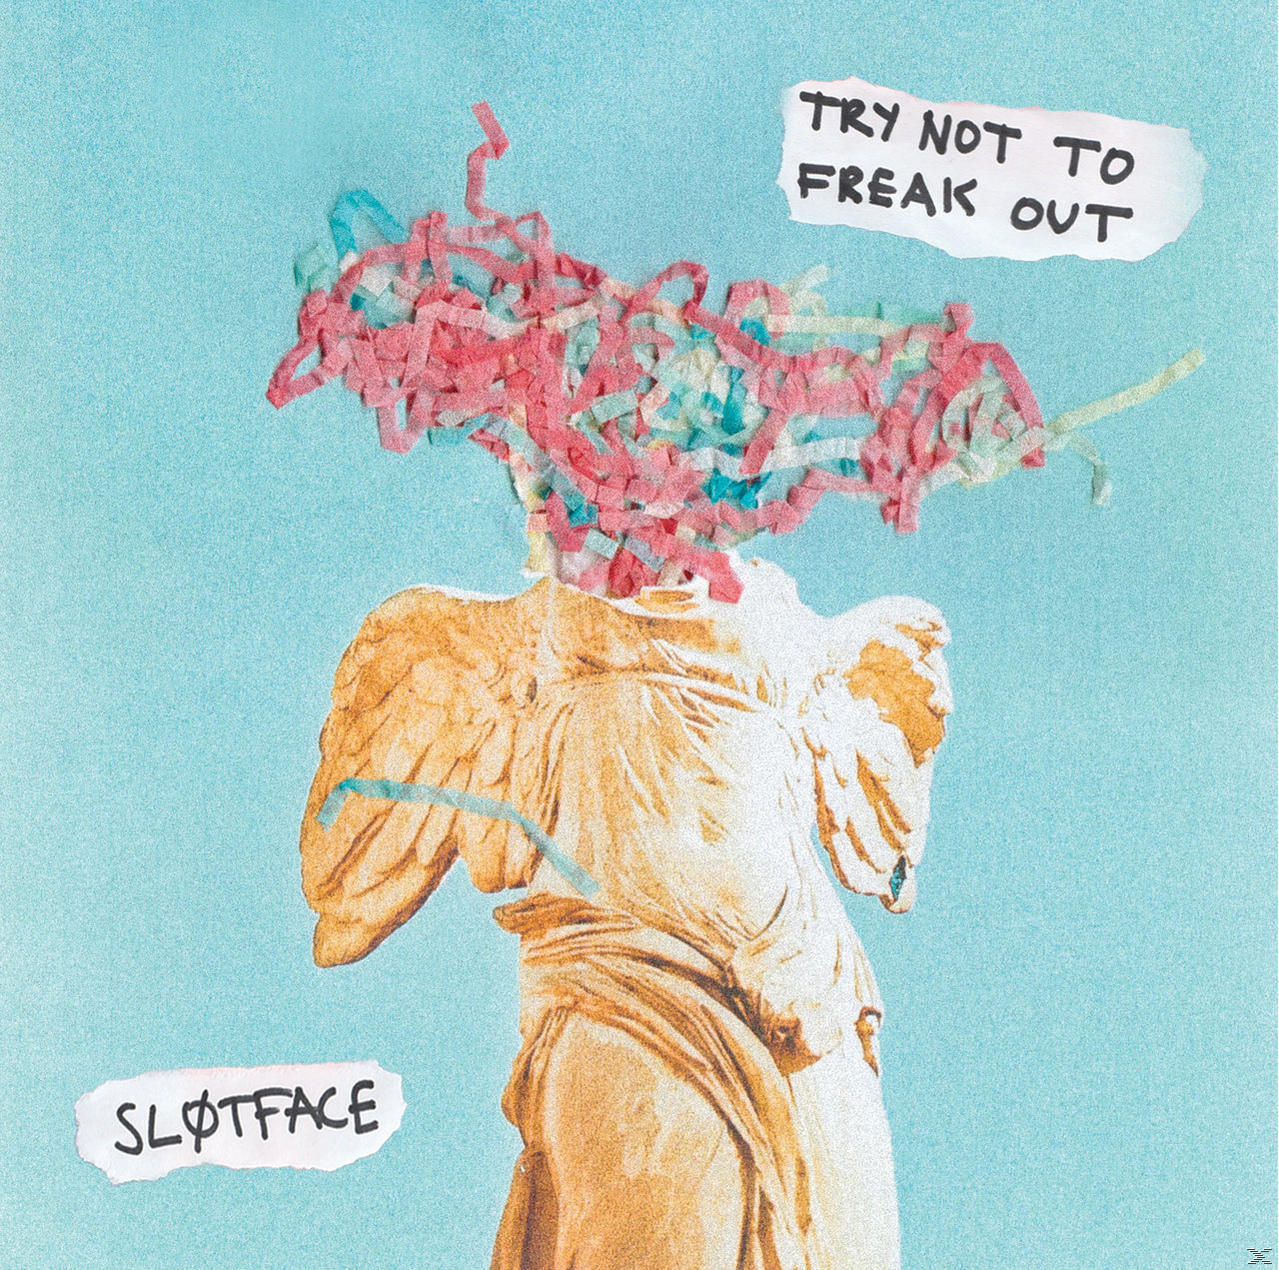 (Vinyl) TRY Slotface NOT - - OUT TO FREAK